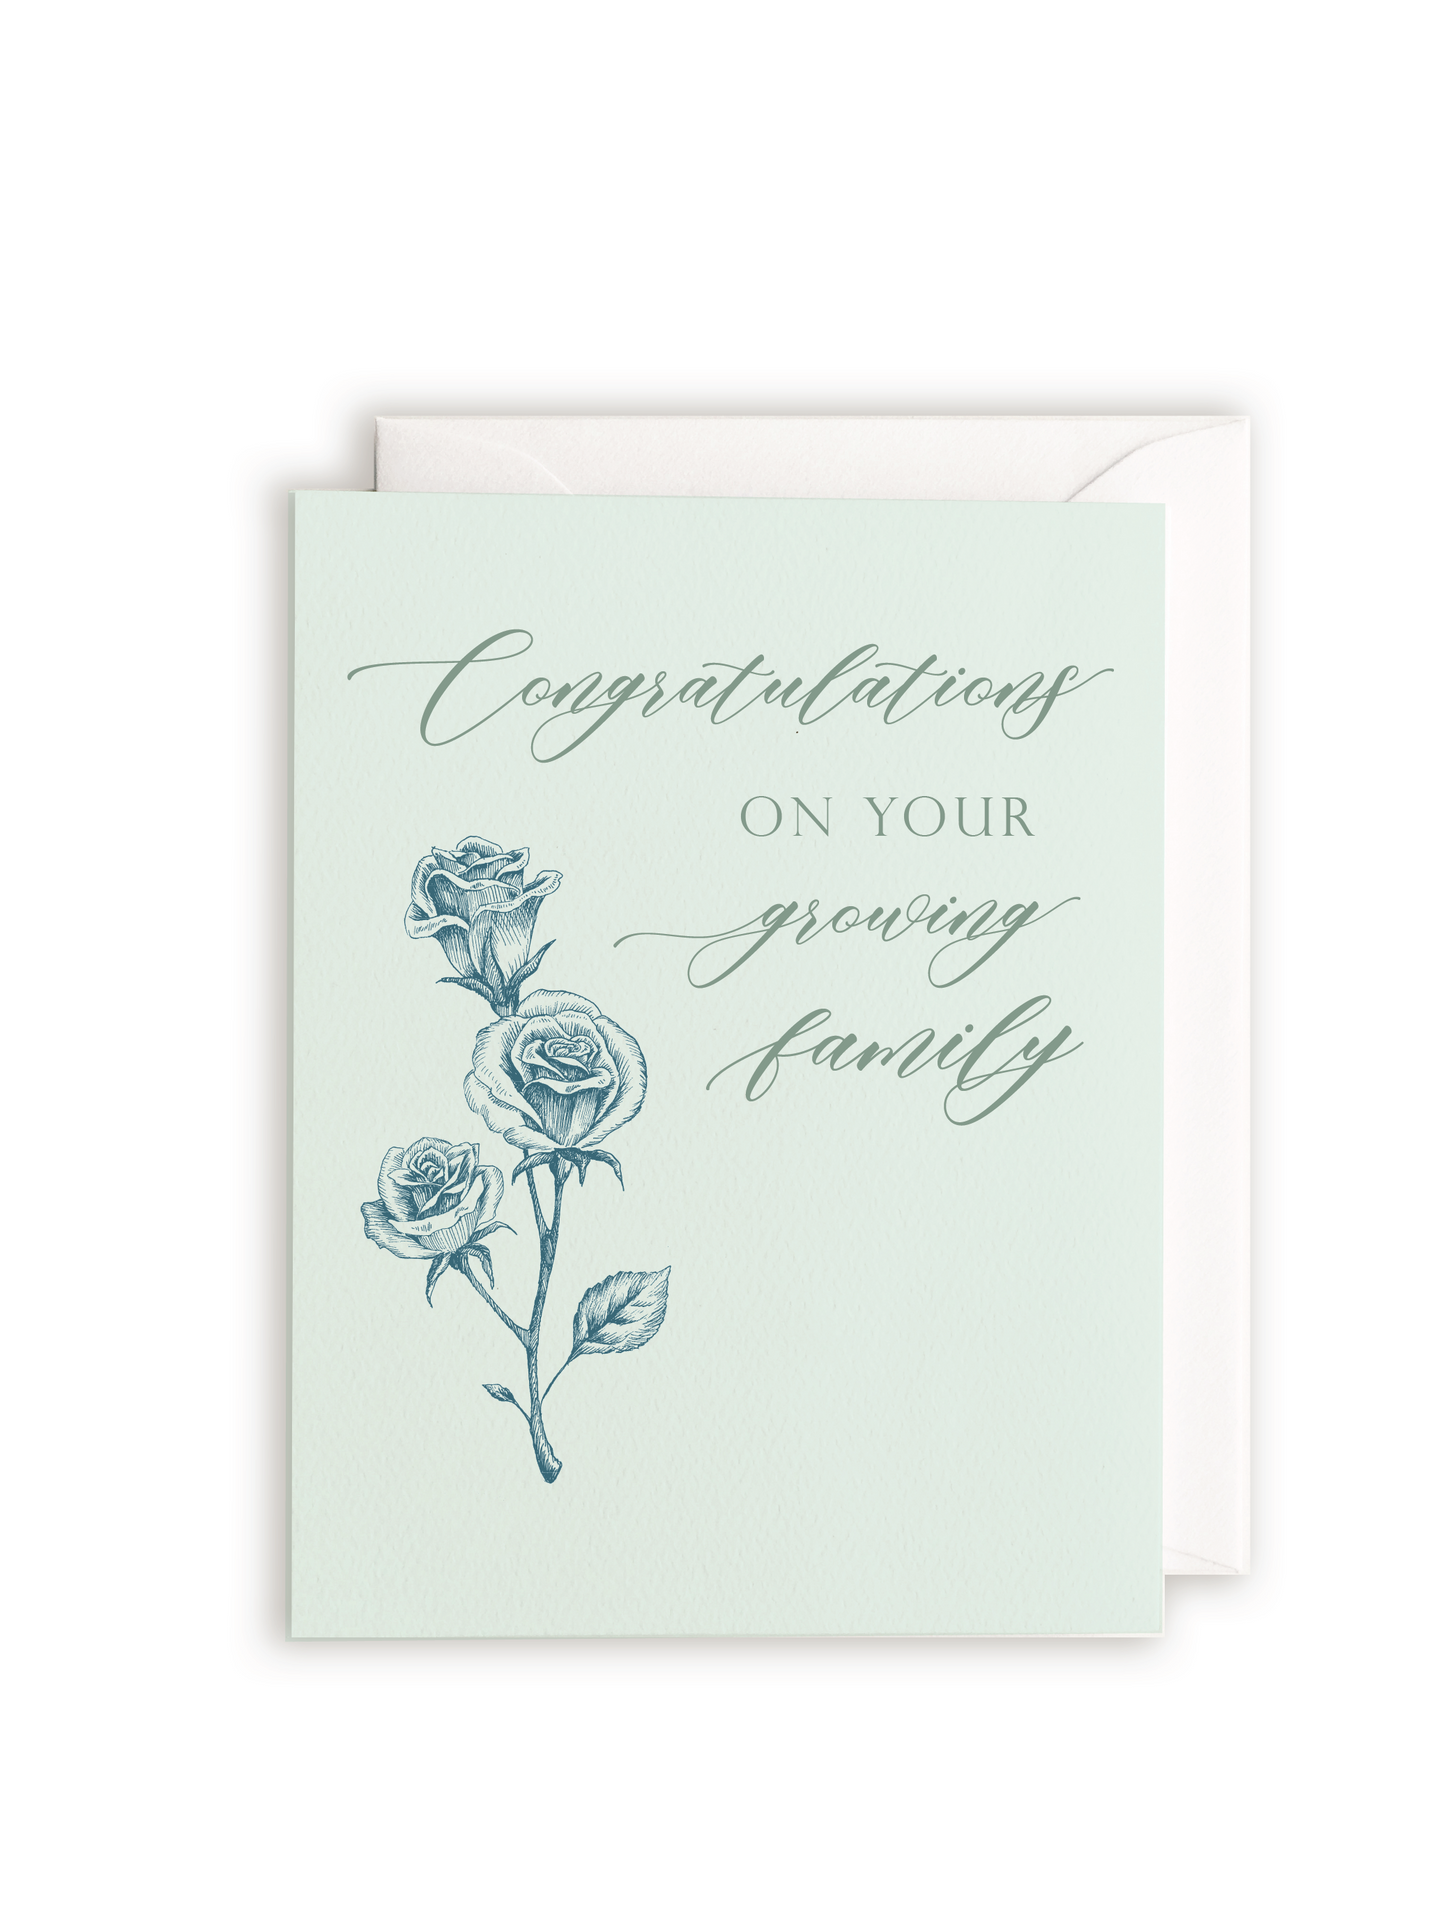 Congrats on Your Growing Family Greeting Card